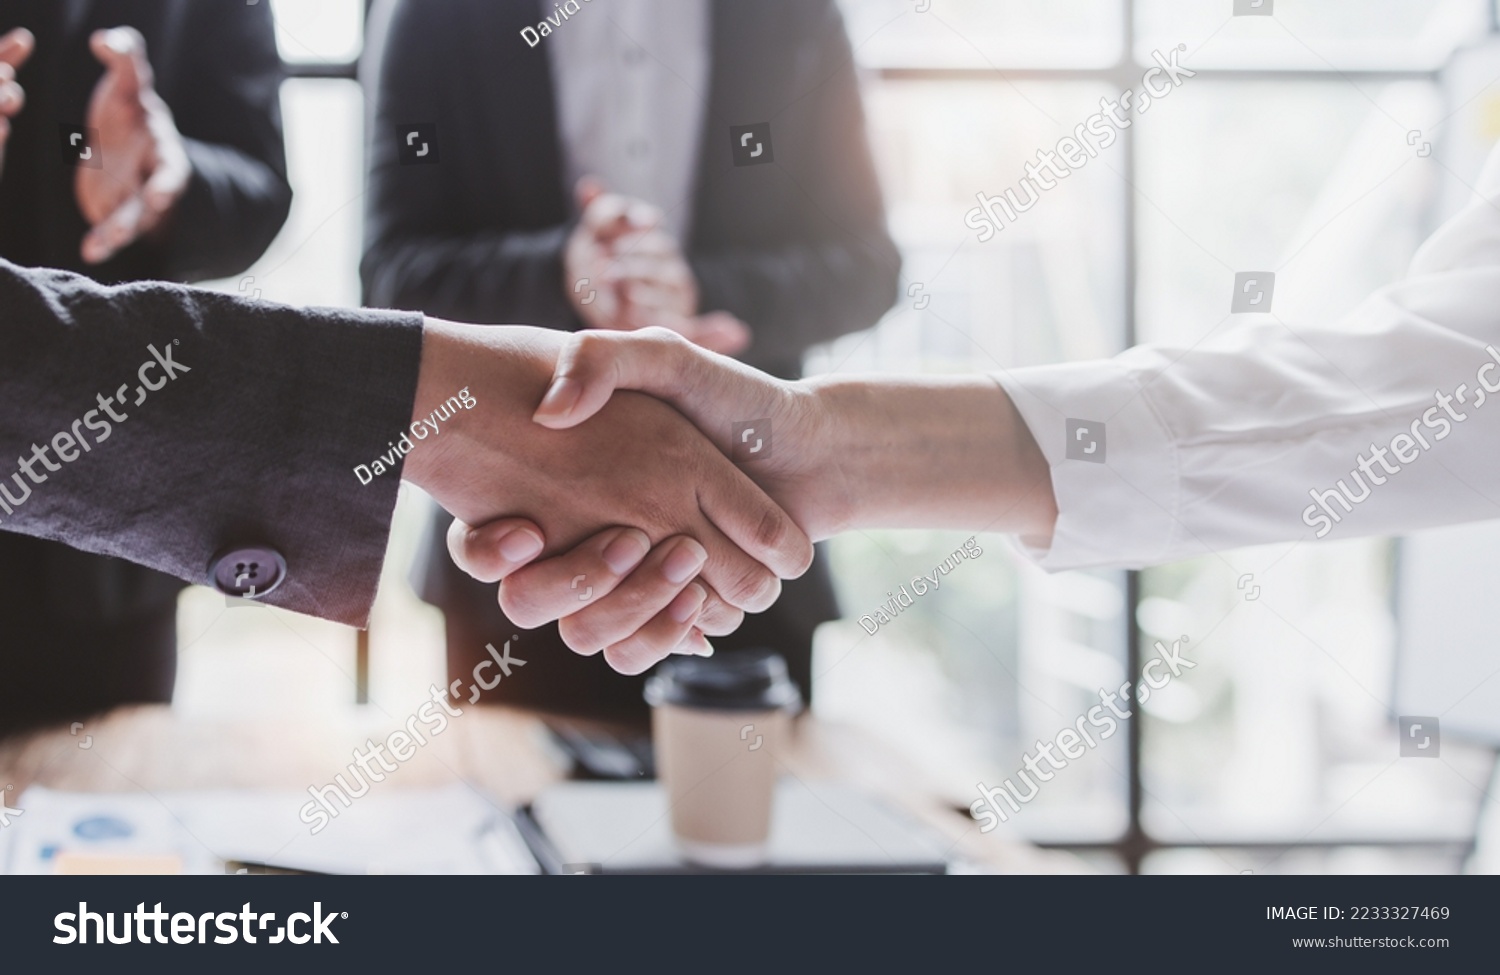 Business handshake for teamwork of business merger and acquisition,successful negotiate,hand shake,two businessman shake hand with partner to celebration partnership and business deal concept #2233327469